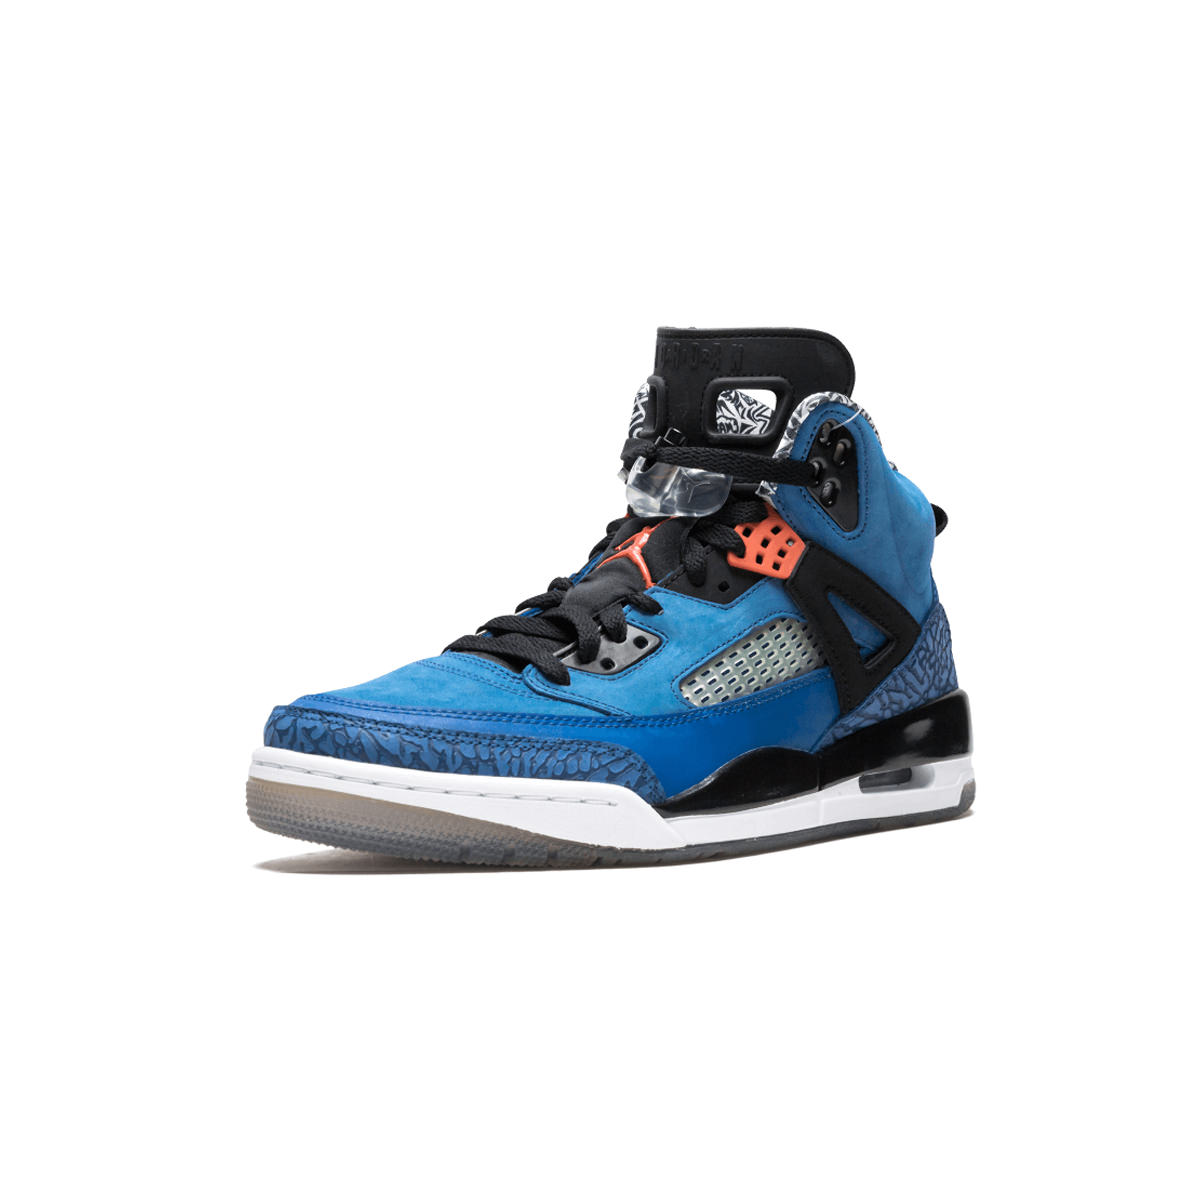 Jordan, Shoes, Extremely Rare Air Jordan Spizike Ny Knicks Limited Edition  Size 12